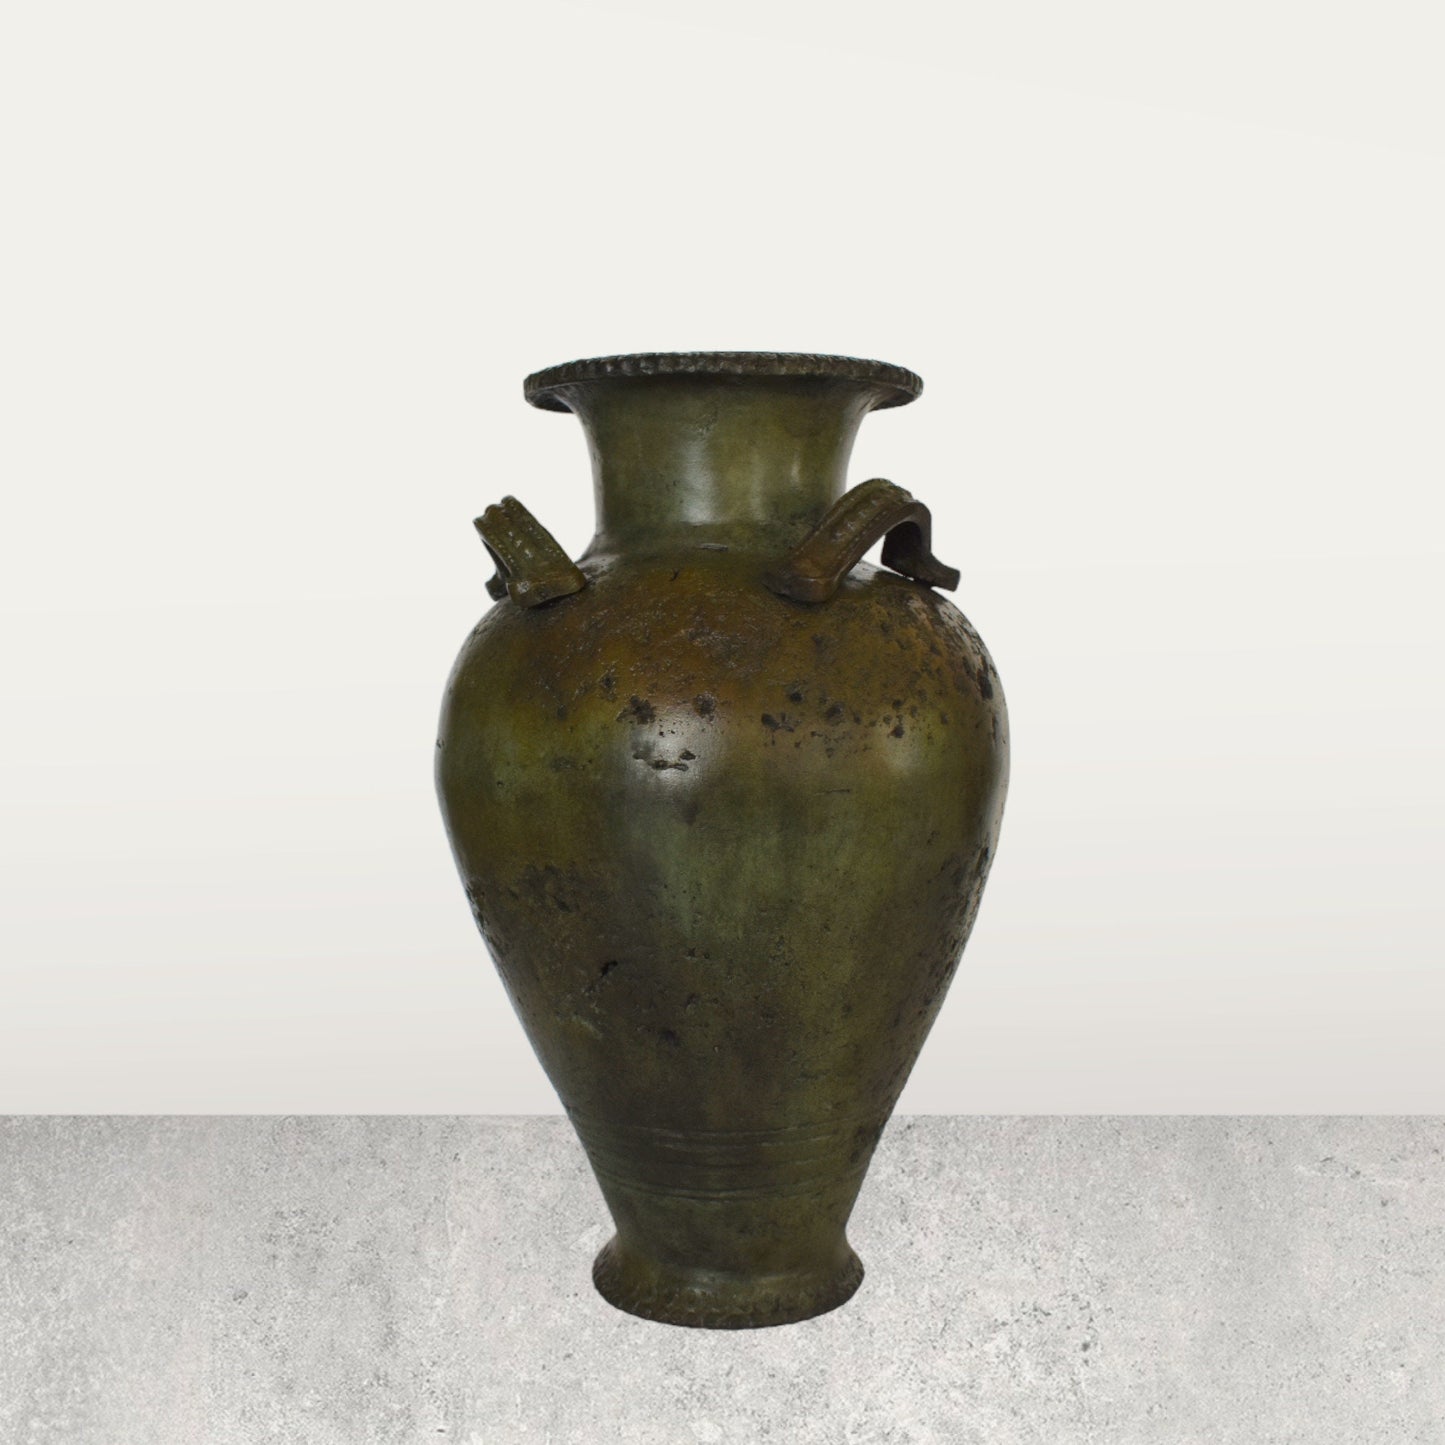 Hydria - Type of water-carrying vessel - A prize in tournaments and competitions - 700-300 BC - Pure Bronze Statue